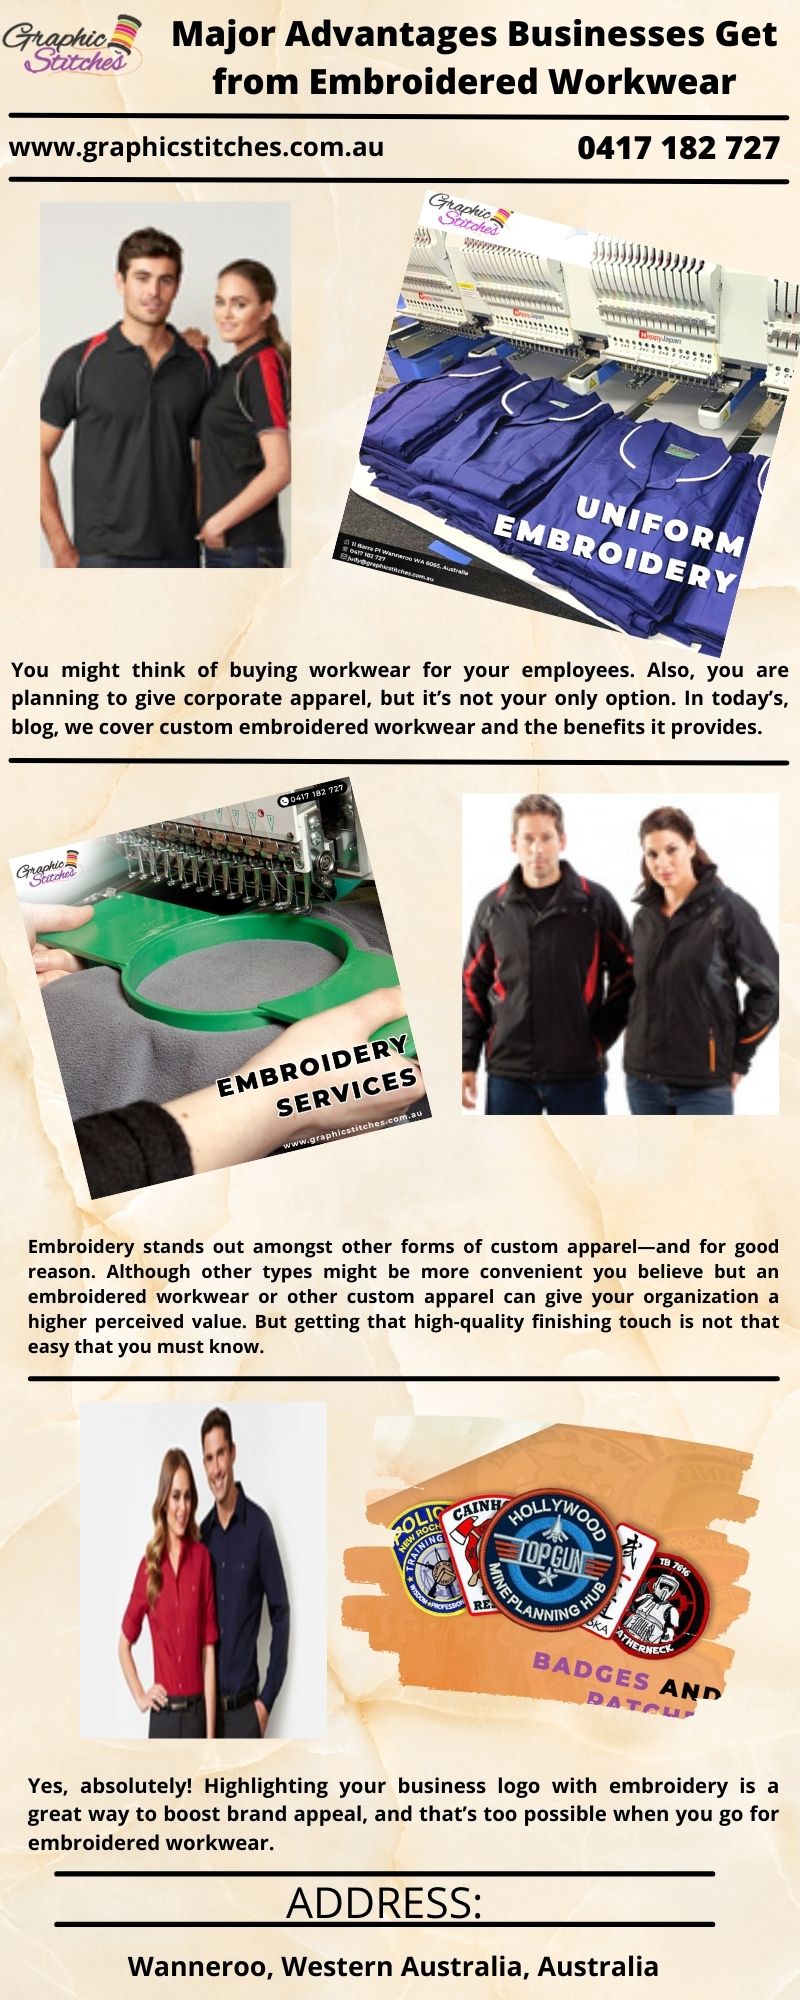 Major Advantages Businesses Get from Embroidered Workwear.jpg Please visit: https://www.graphicstitches.com.au/major-advantages-businesses-get-from-embroidered-workwear.html
 by Graphicstitches